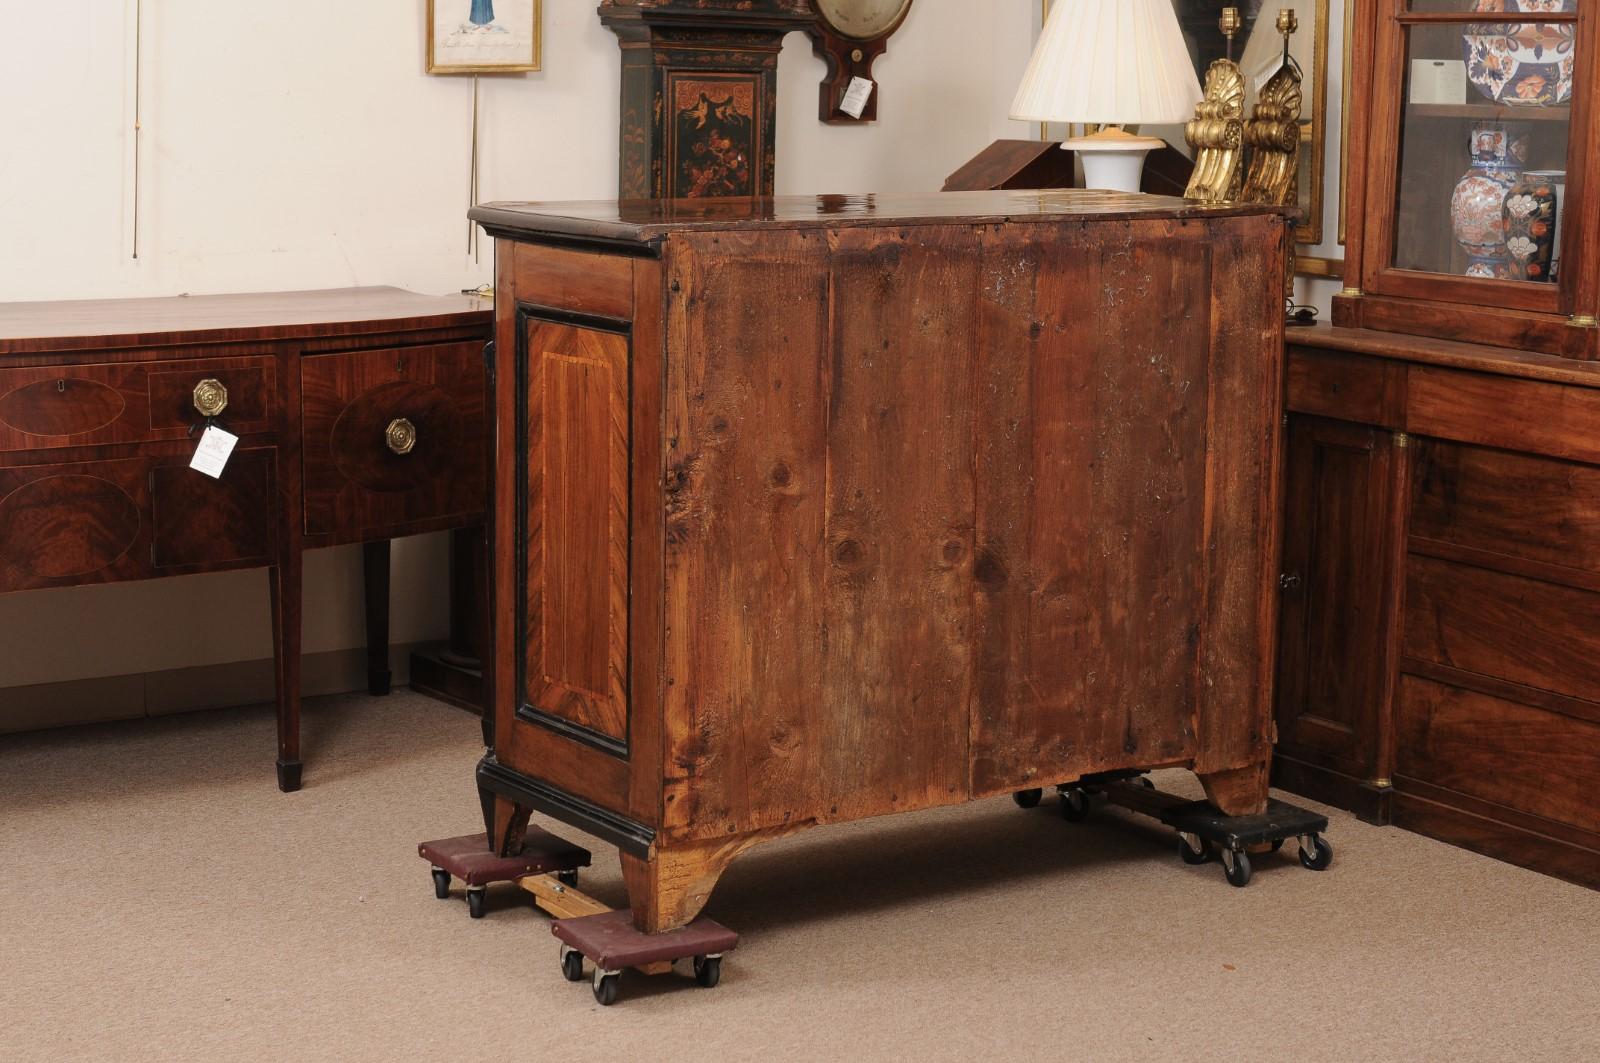 Large Early 18th Century Italian Canterano Walnut Inlaid Commode with 4 Drawers  For Sale 6